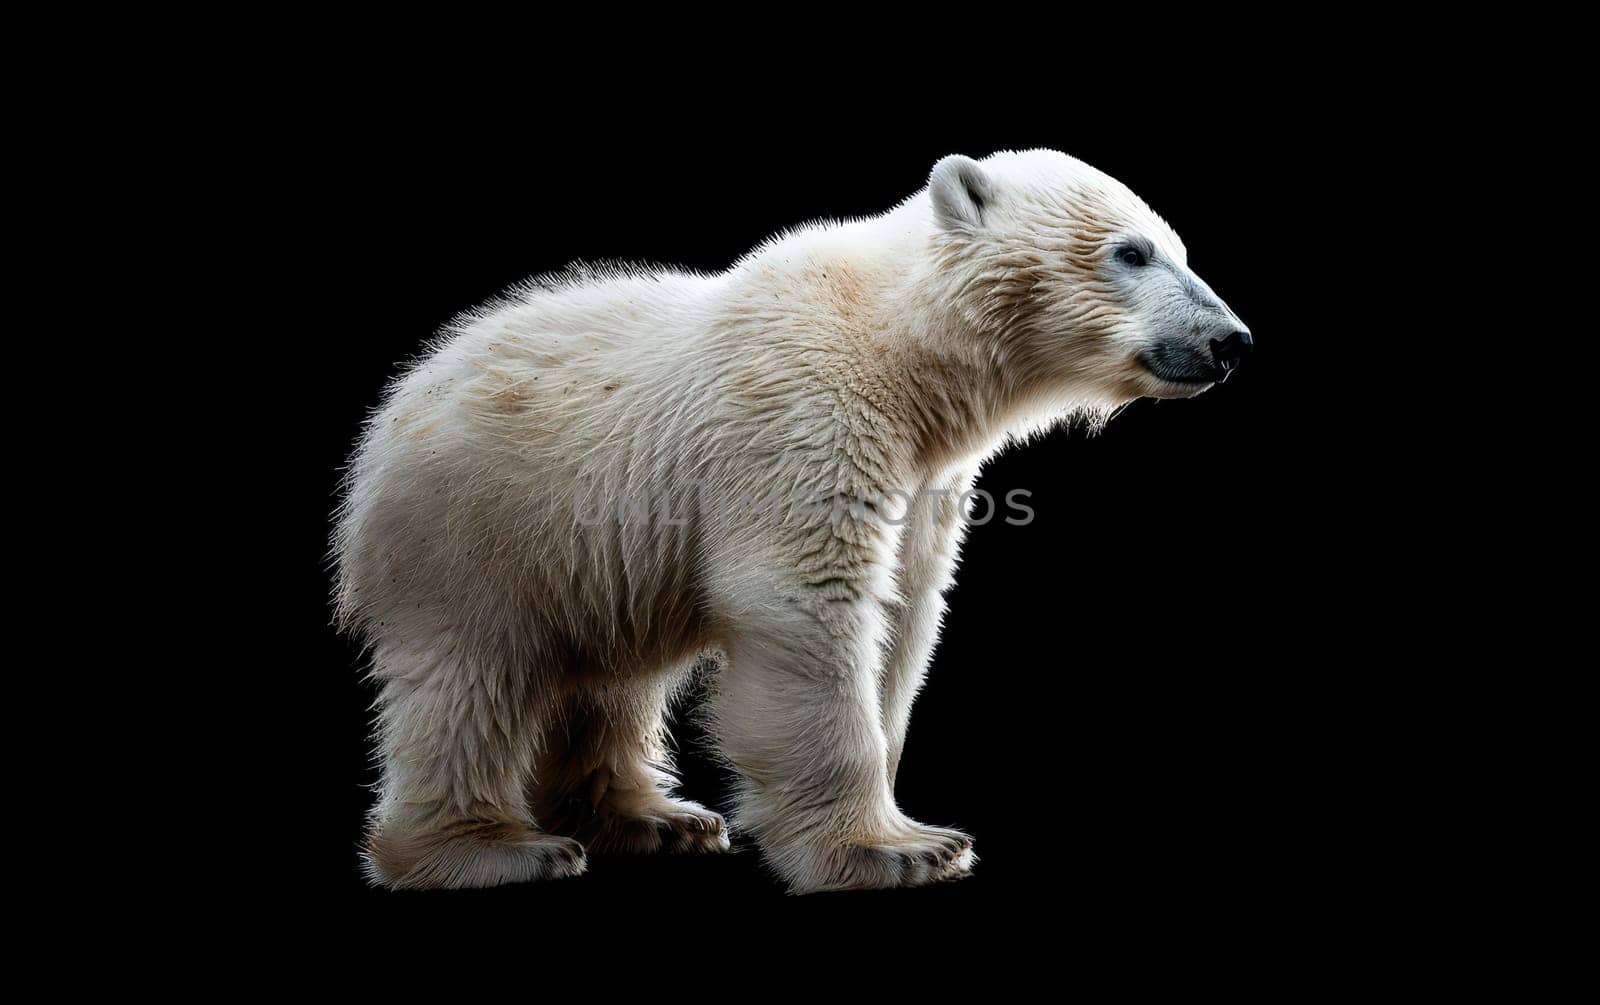 A young polar bear stands in profile against a stark black background, highlighting its distinctive silhouette. The contrast accentuates the bear's unique features and the soft texture of its coat.